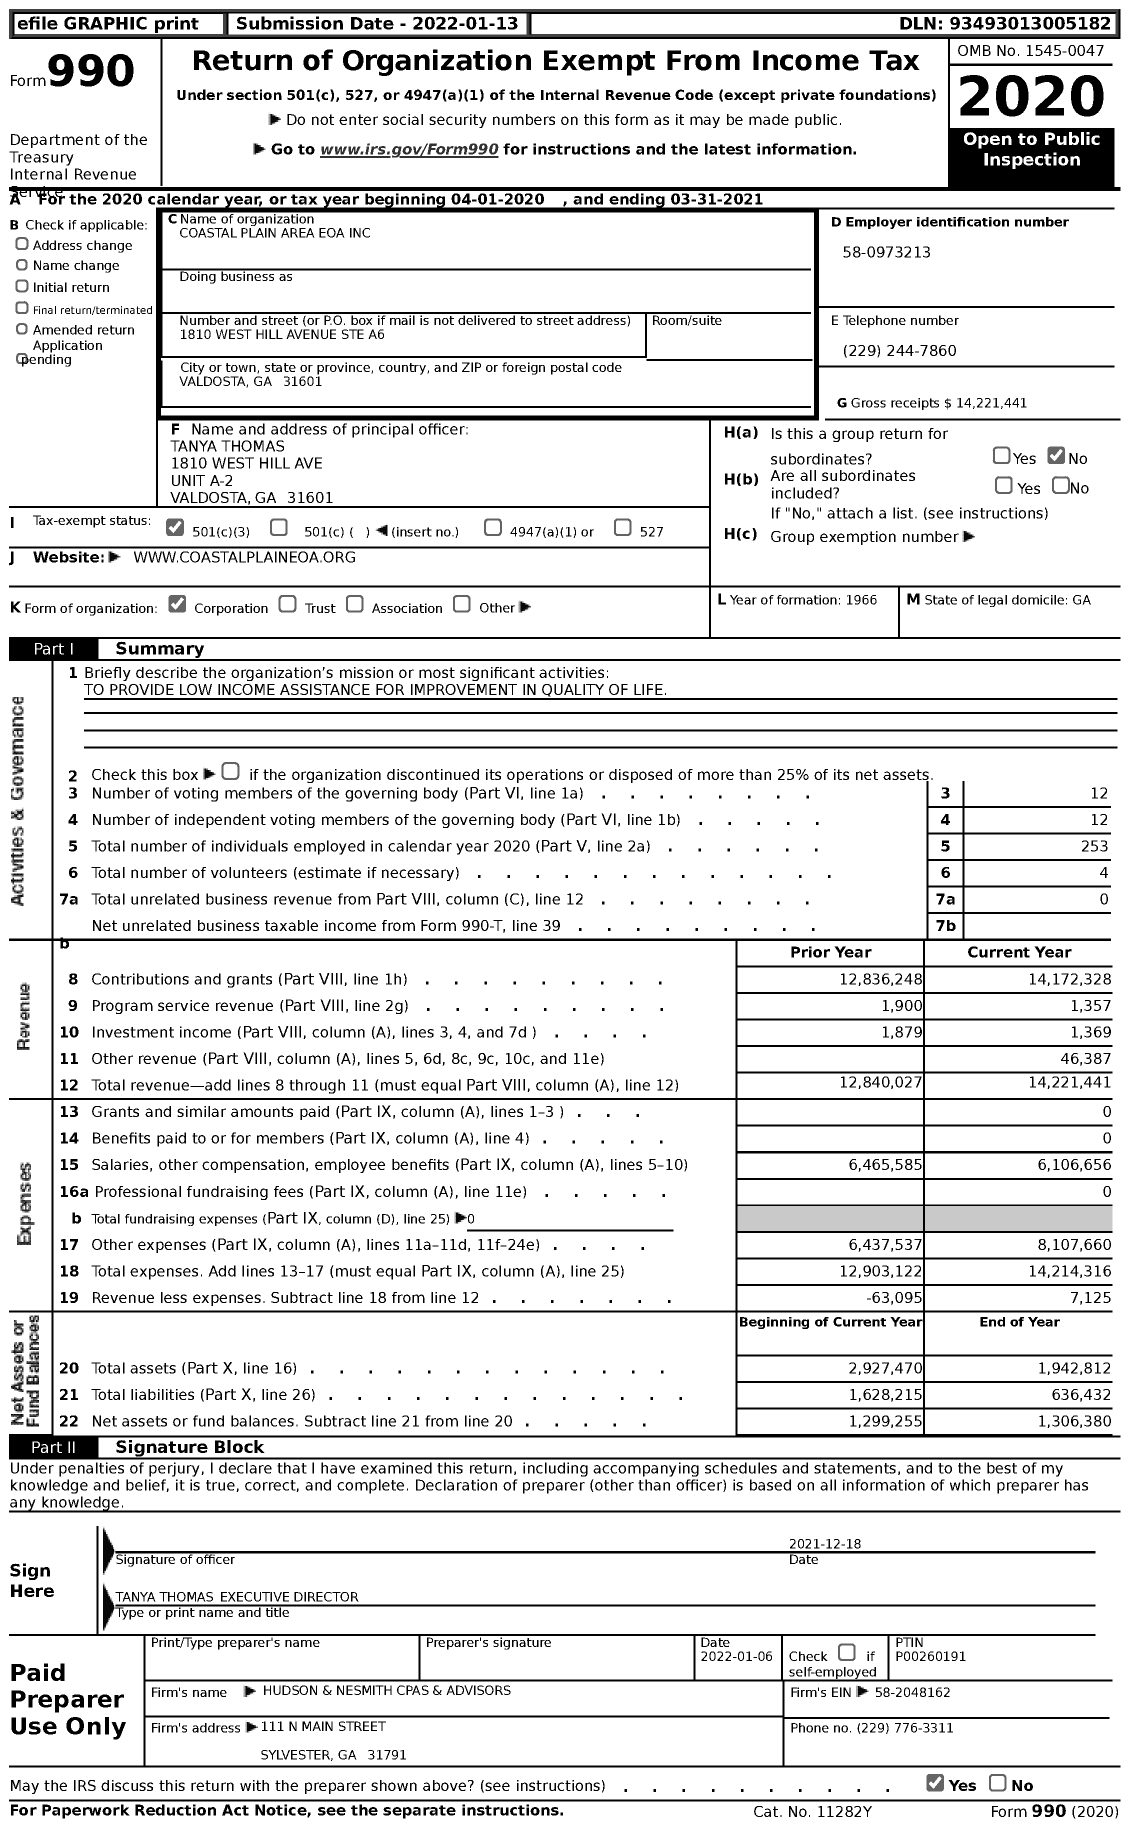 Image of first page of 2020 Form 990 for Coastal Plain Area Eoa